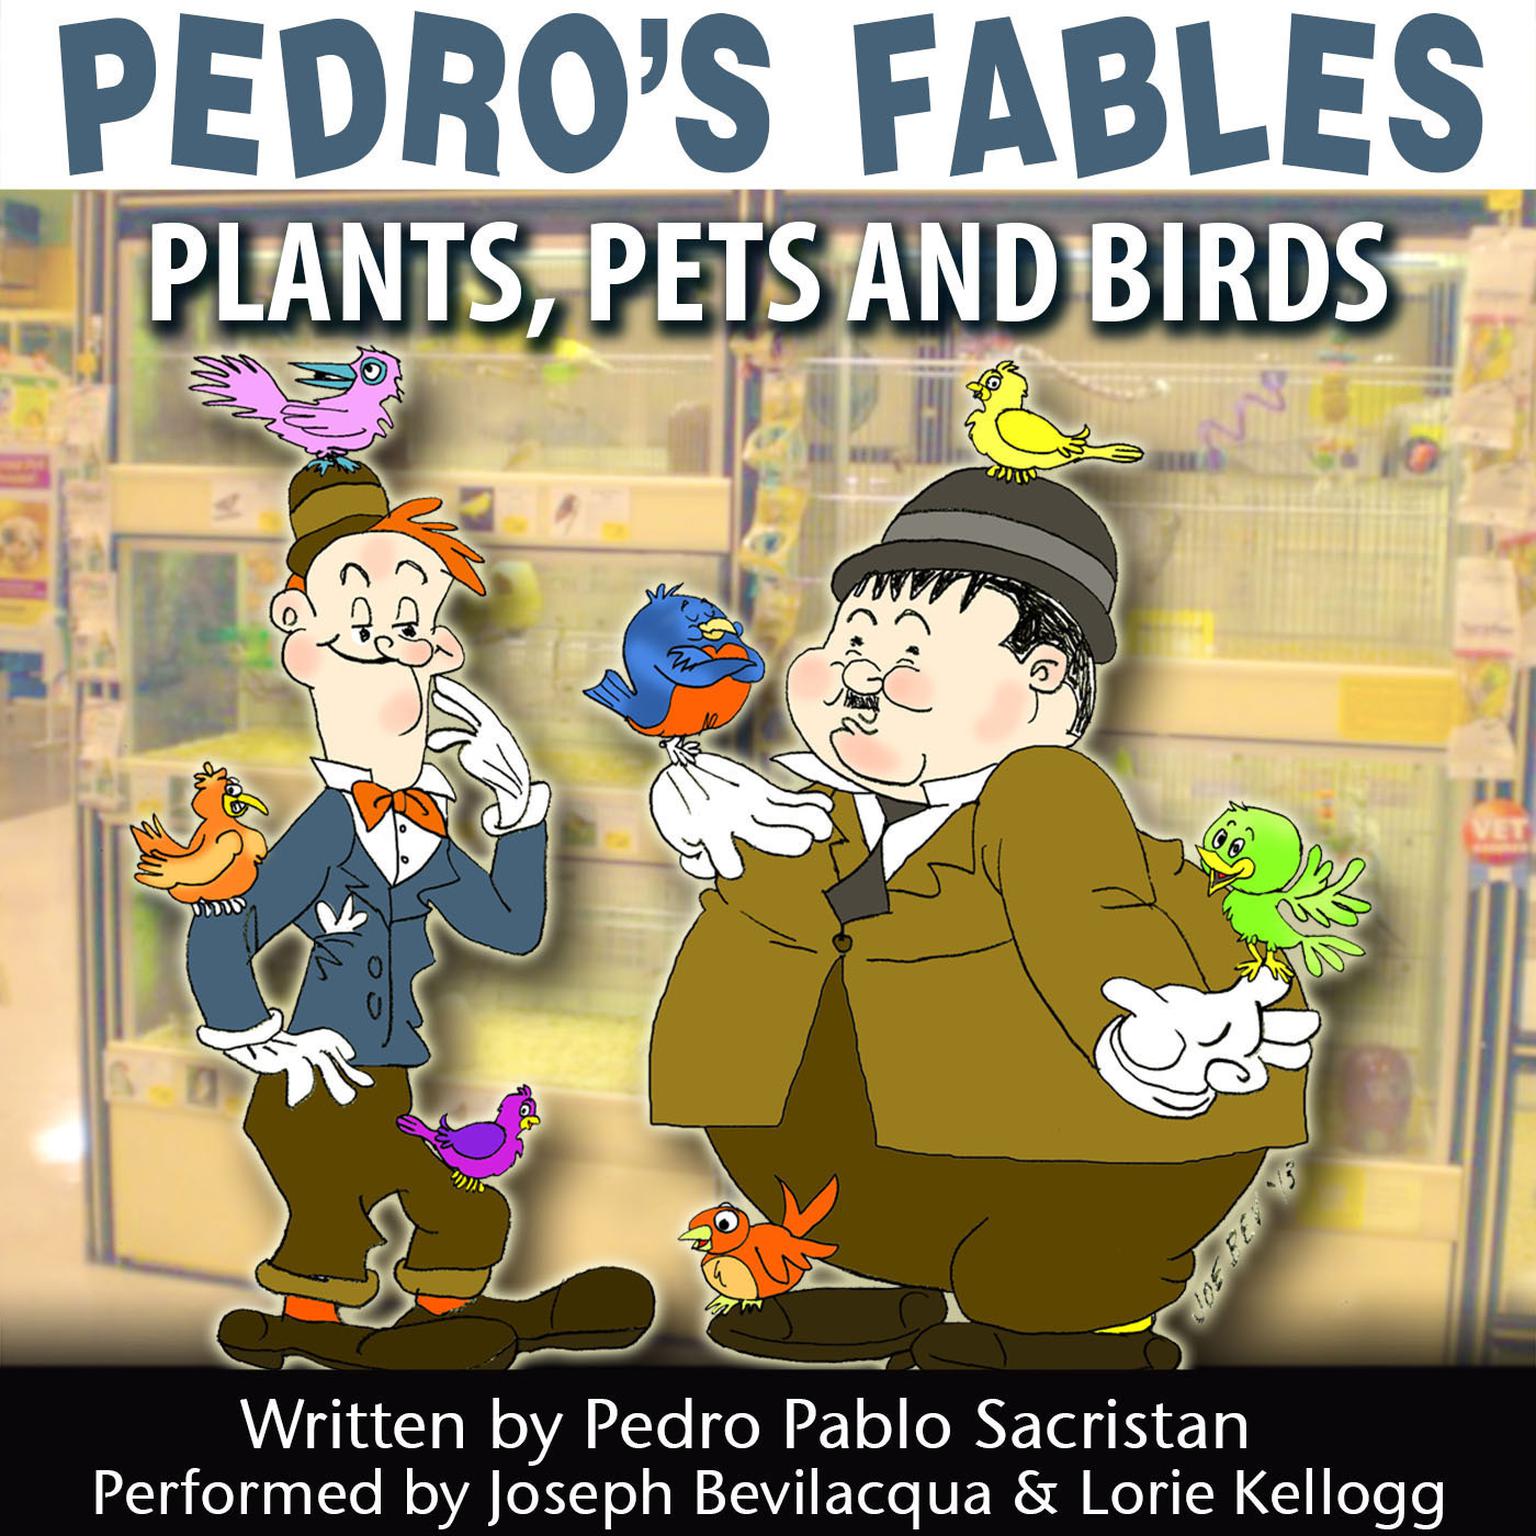 Pedro’s Fables: Plants, Pets, and Birds Audiobook, by Pedro Pablo Sacristán